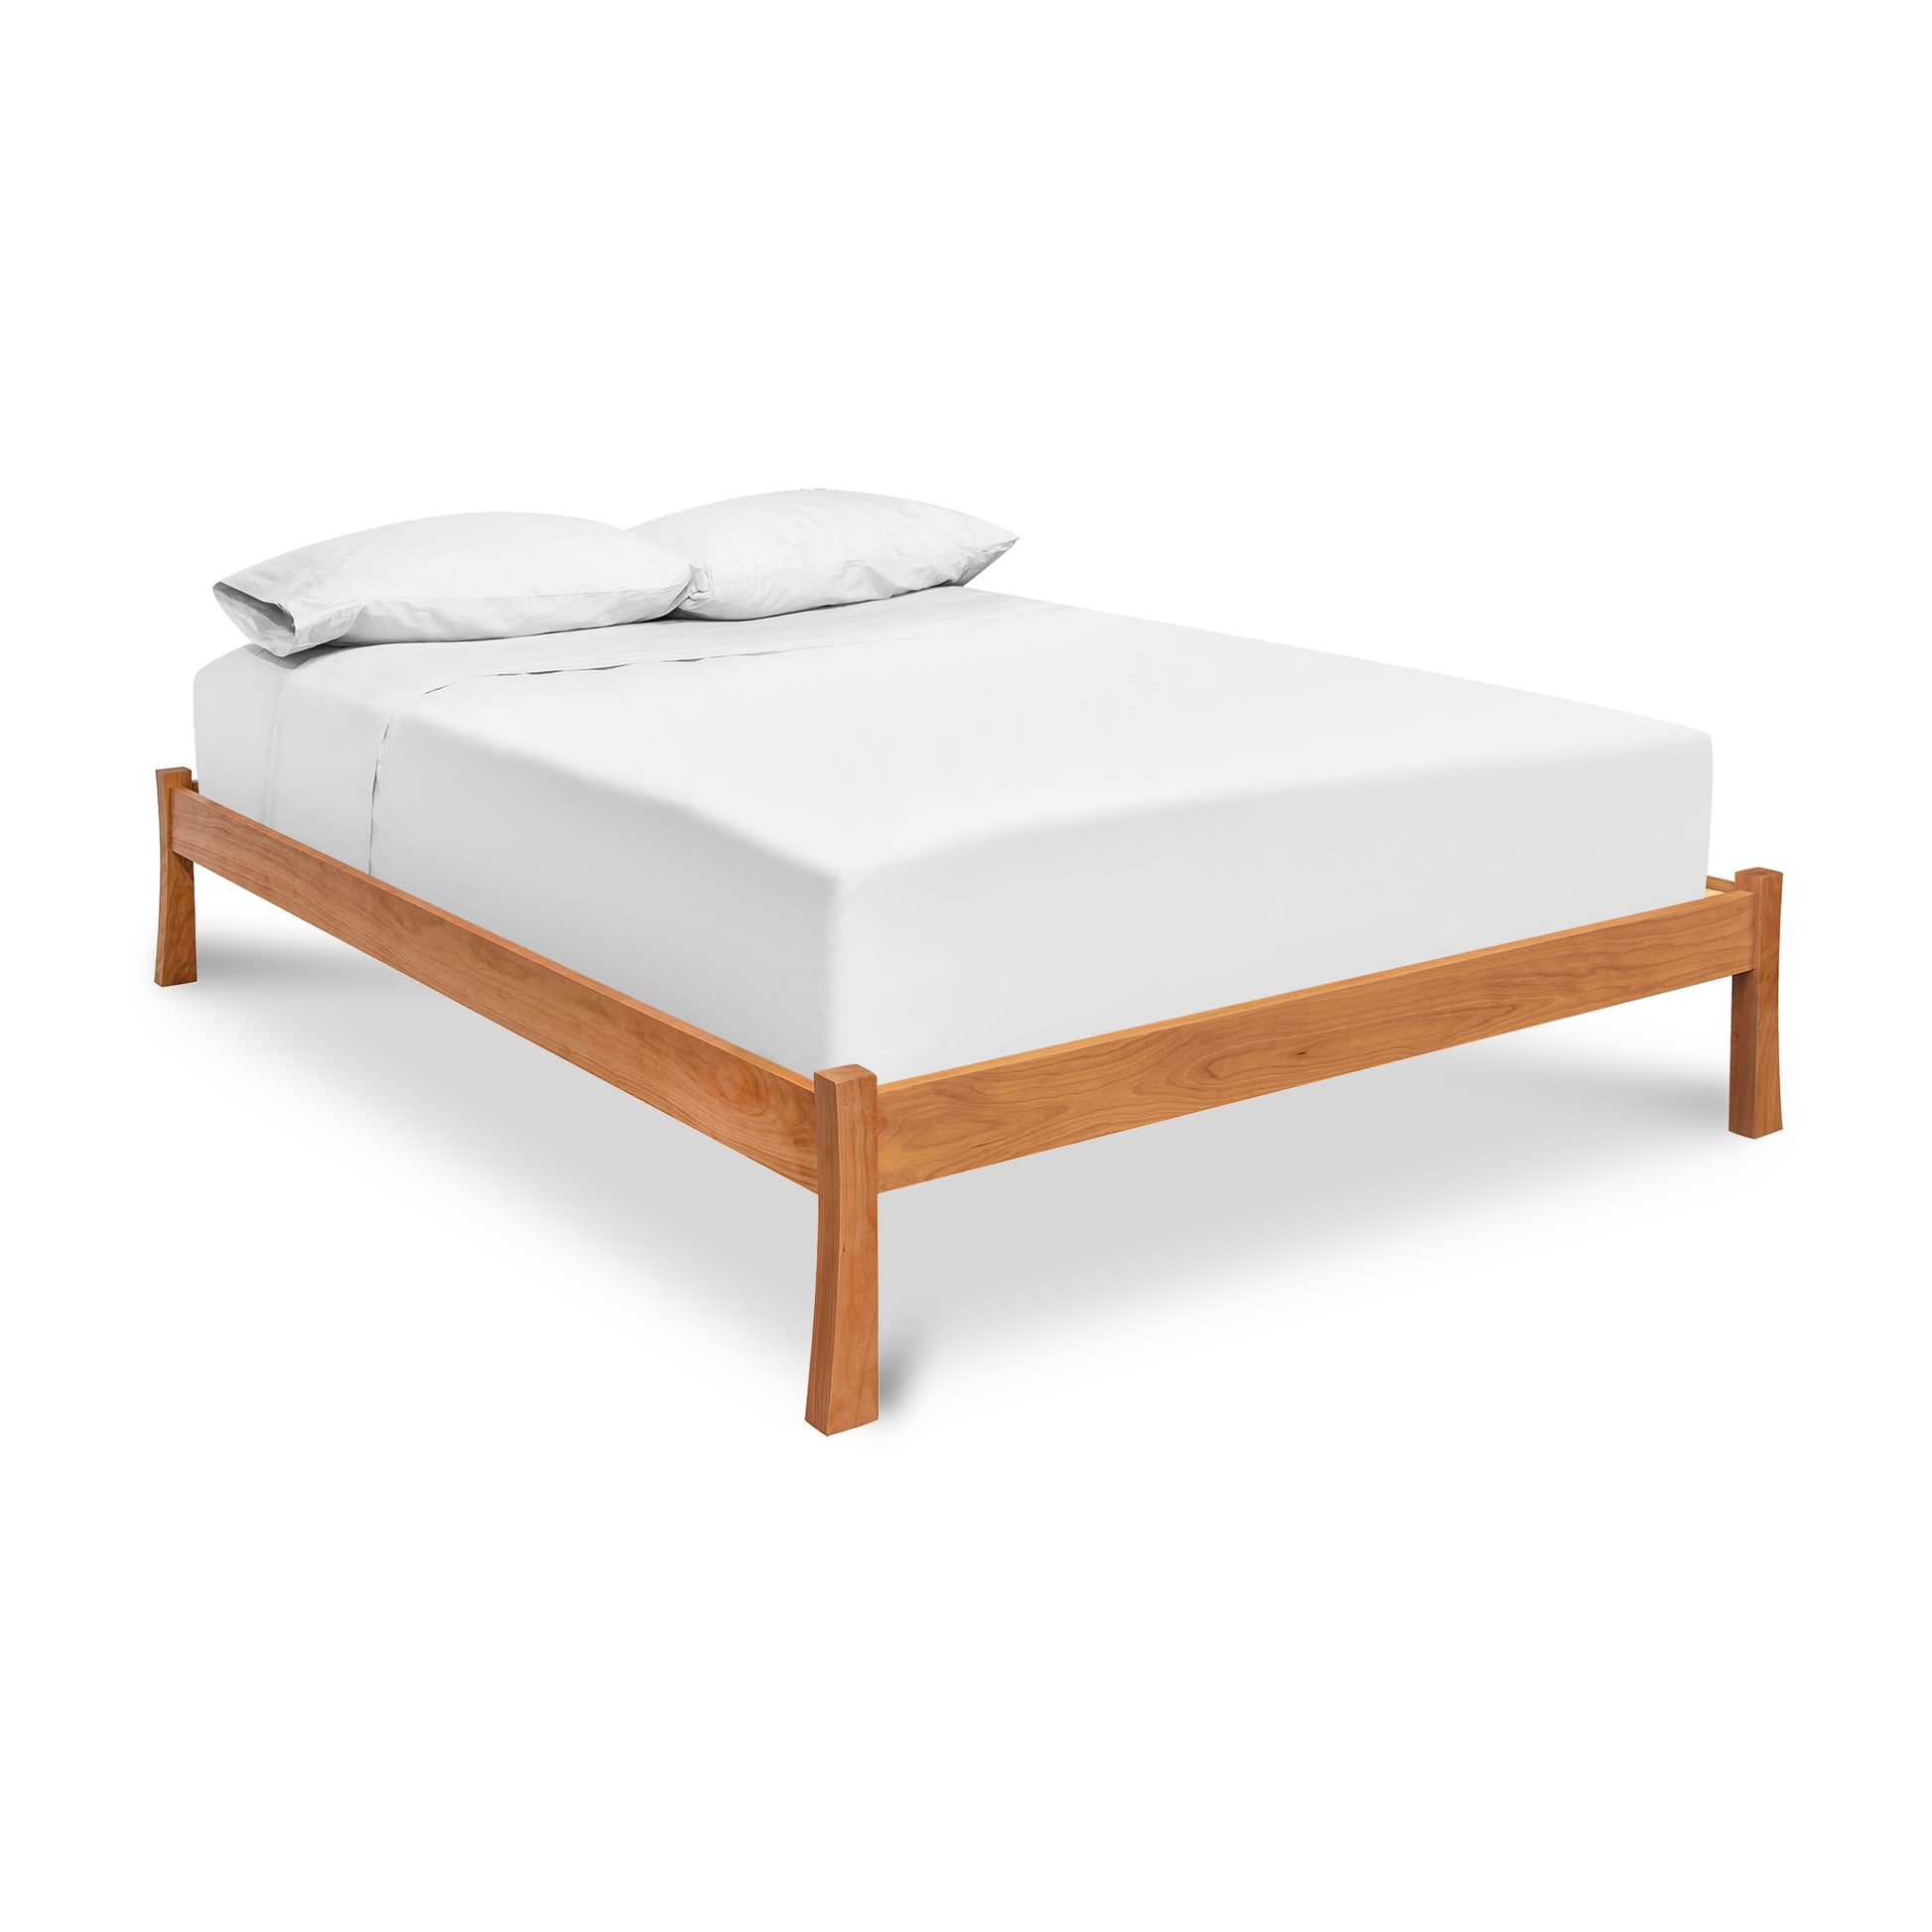 A Contemporary Craftsman Studio-Style Platform Bed by Vermont Furniture Designs, with white sheets, offering a minimalist look.